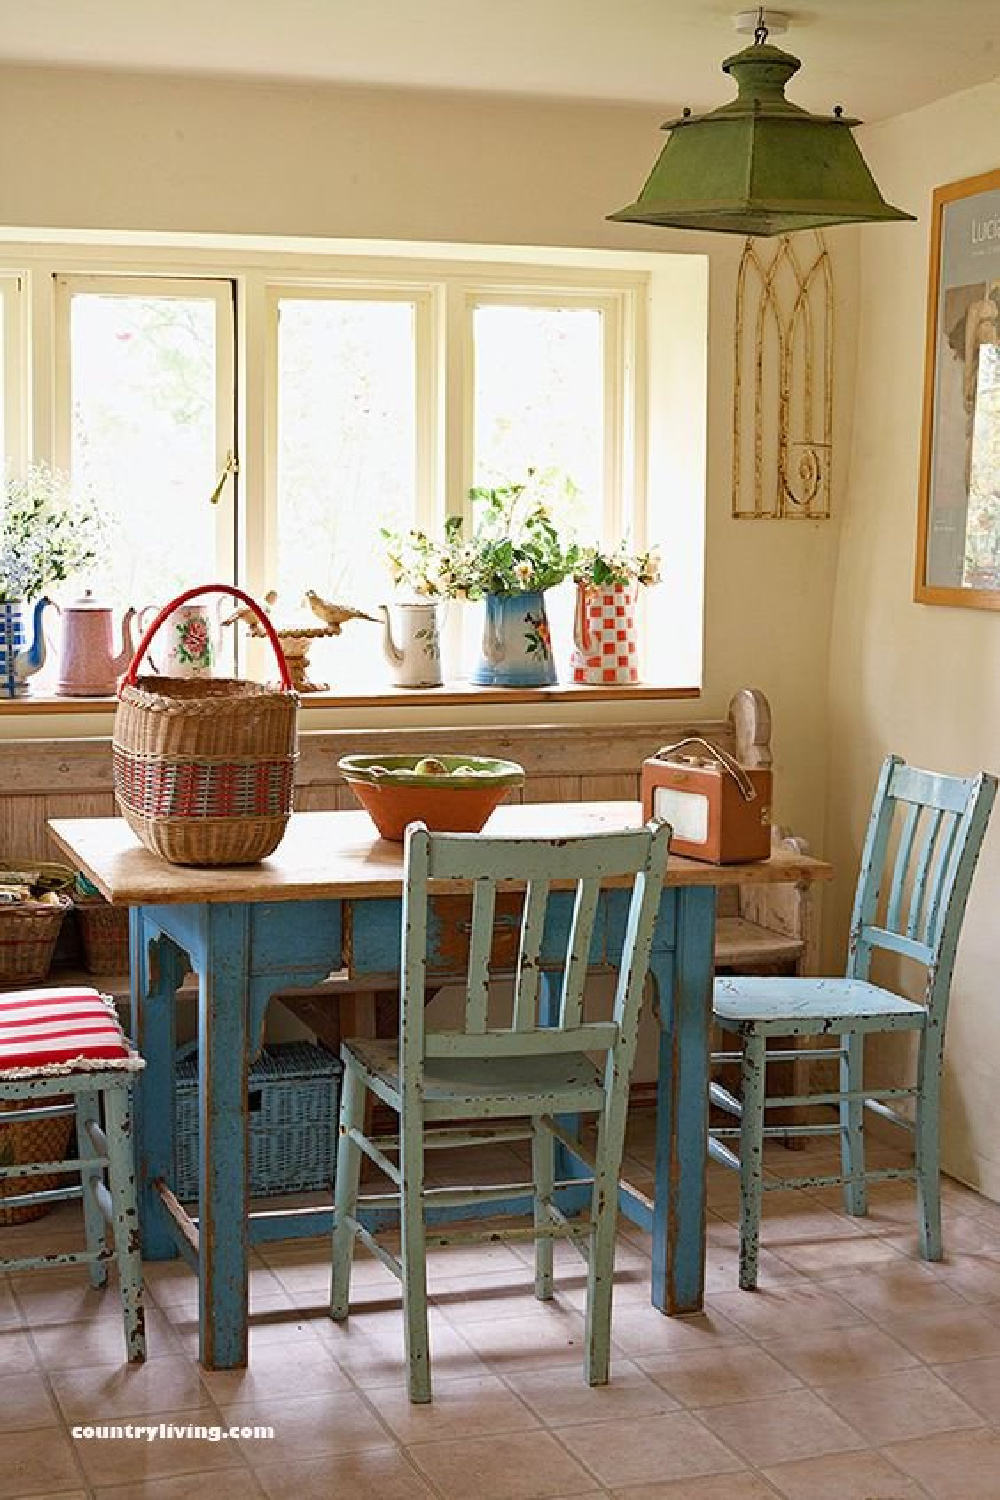 Lovely breakfast nook with turquoise chairs in a farmhouse kitchen - Country Living. #breakfastnook #turquoise